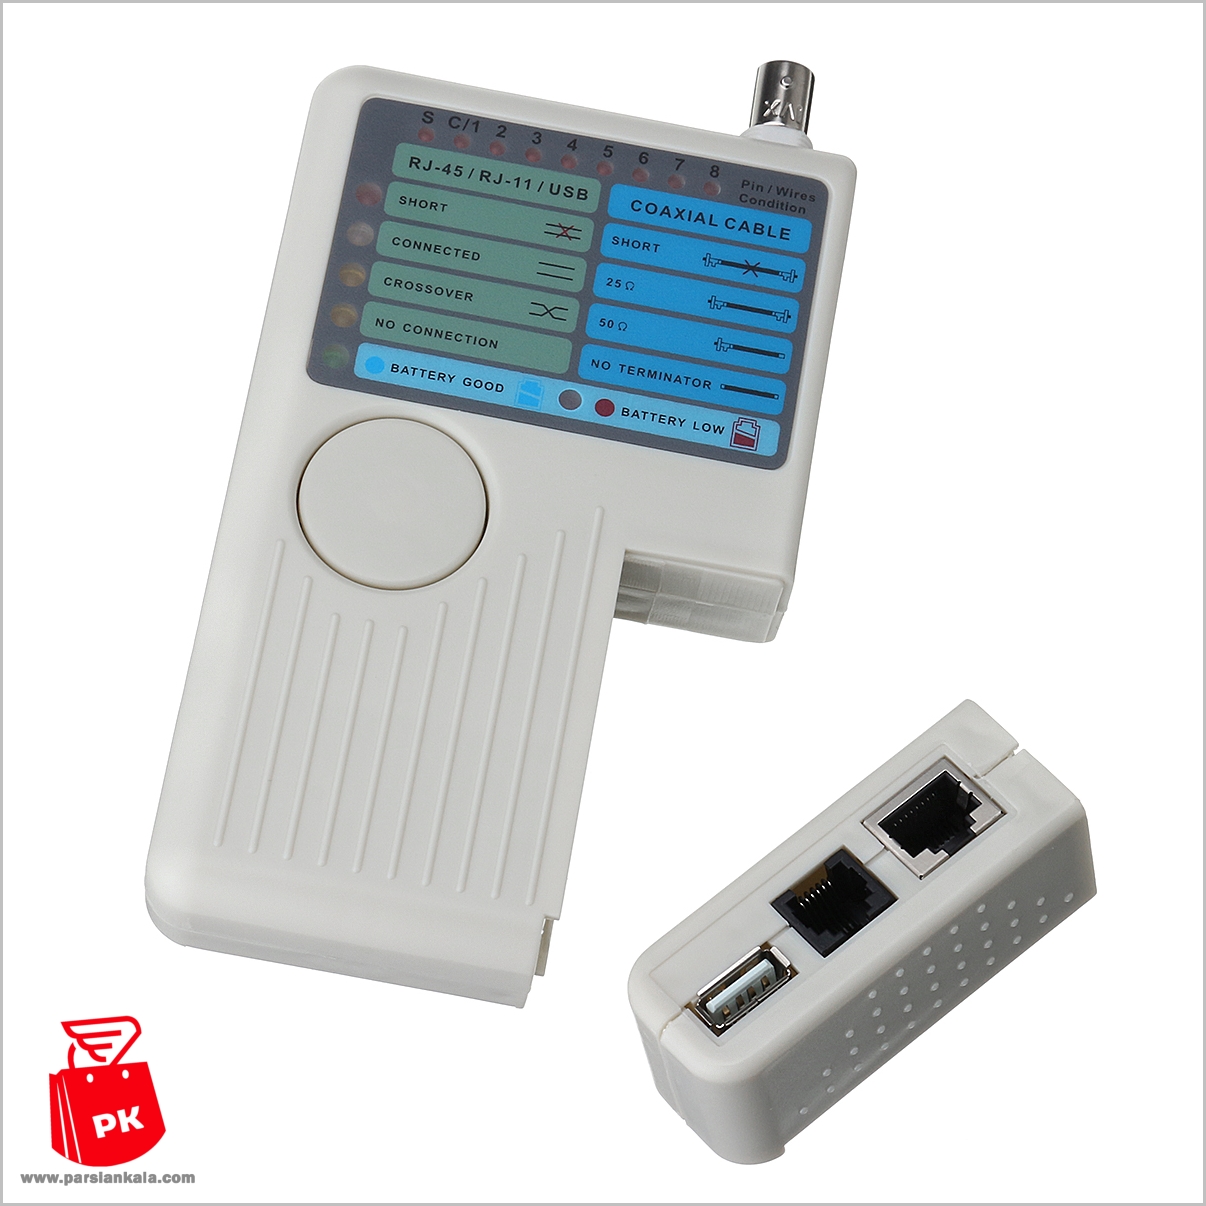 4 in 1 network cable rj45 rj11 usb bnc lan cable cat5 cat6 cable tester%20(9) ParsianKala.IR